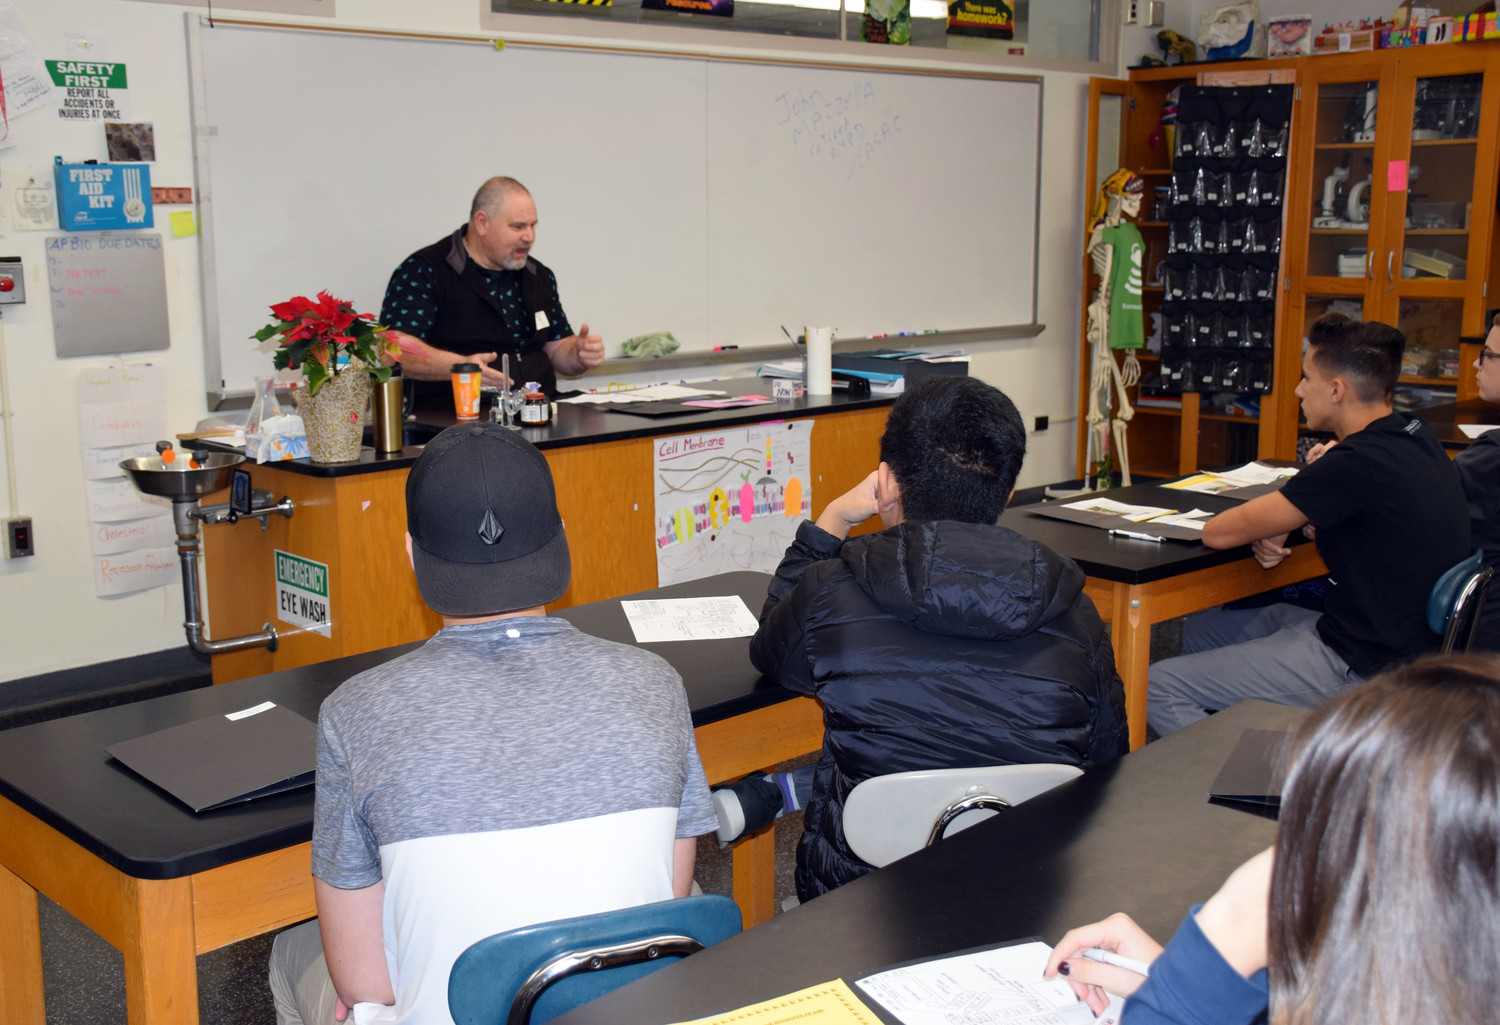 John Massella, retired police officer with the New York Police Department, educated students about law enforcement during W.T. Clarke High School’s first Career Day.